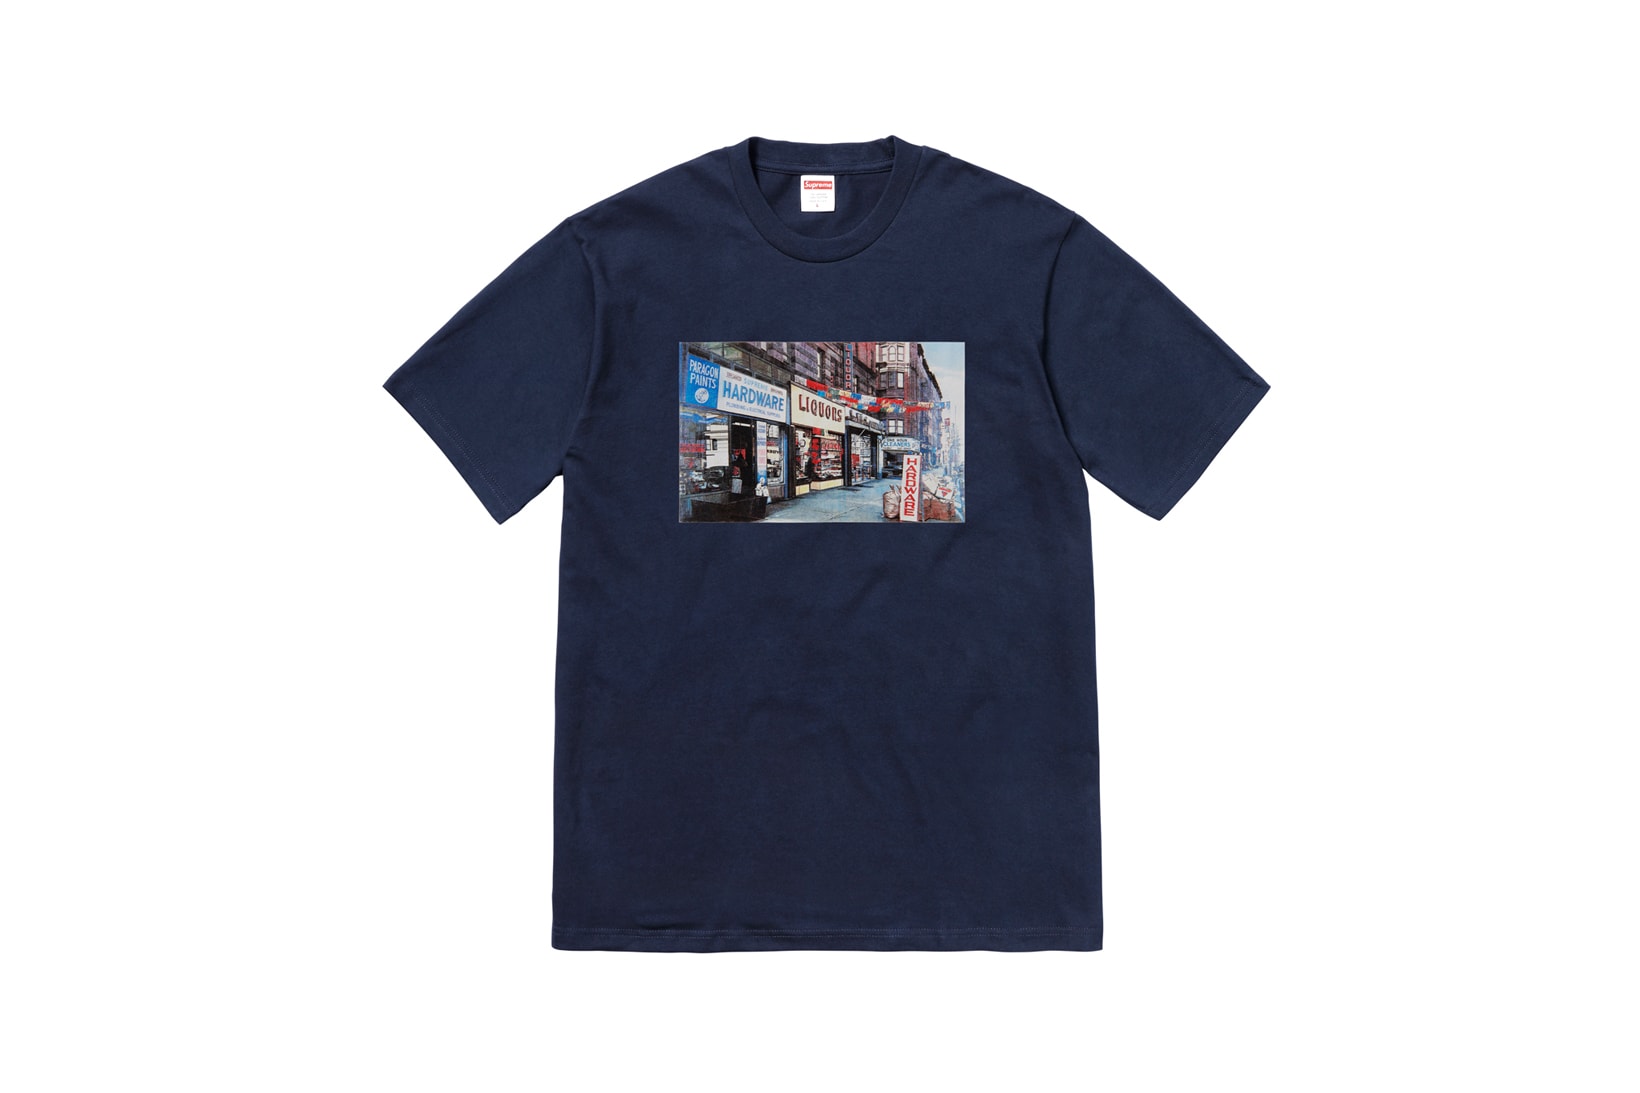 Supreme Summer 2018 T-Shirt Tees Collection Storefront Navy